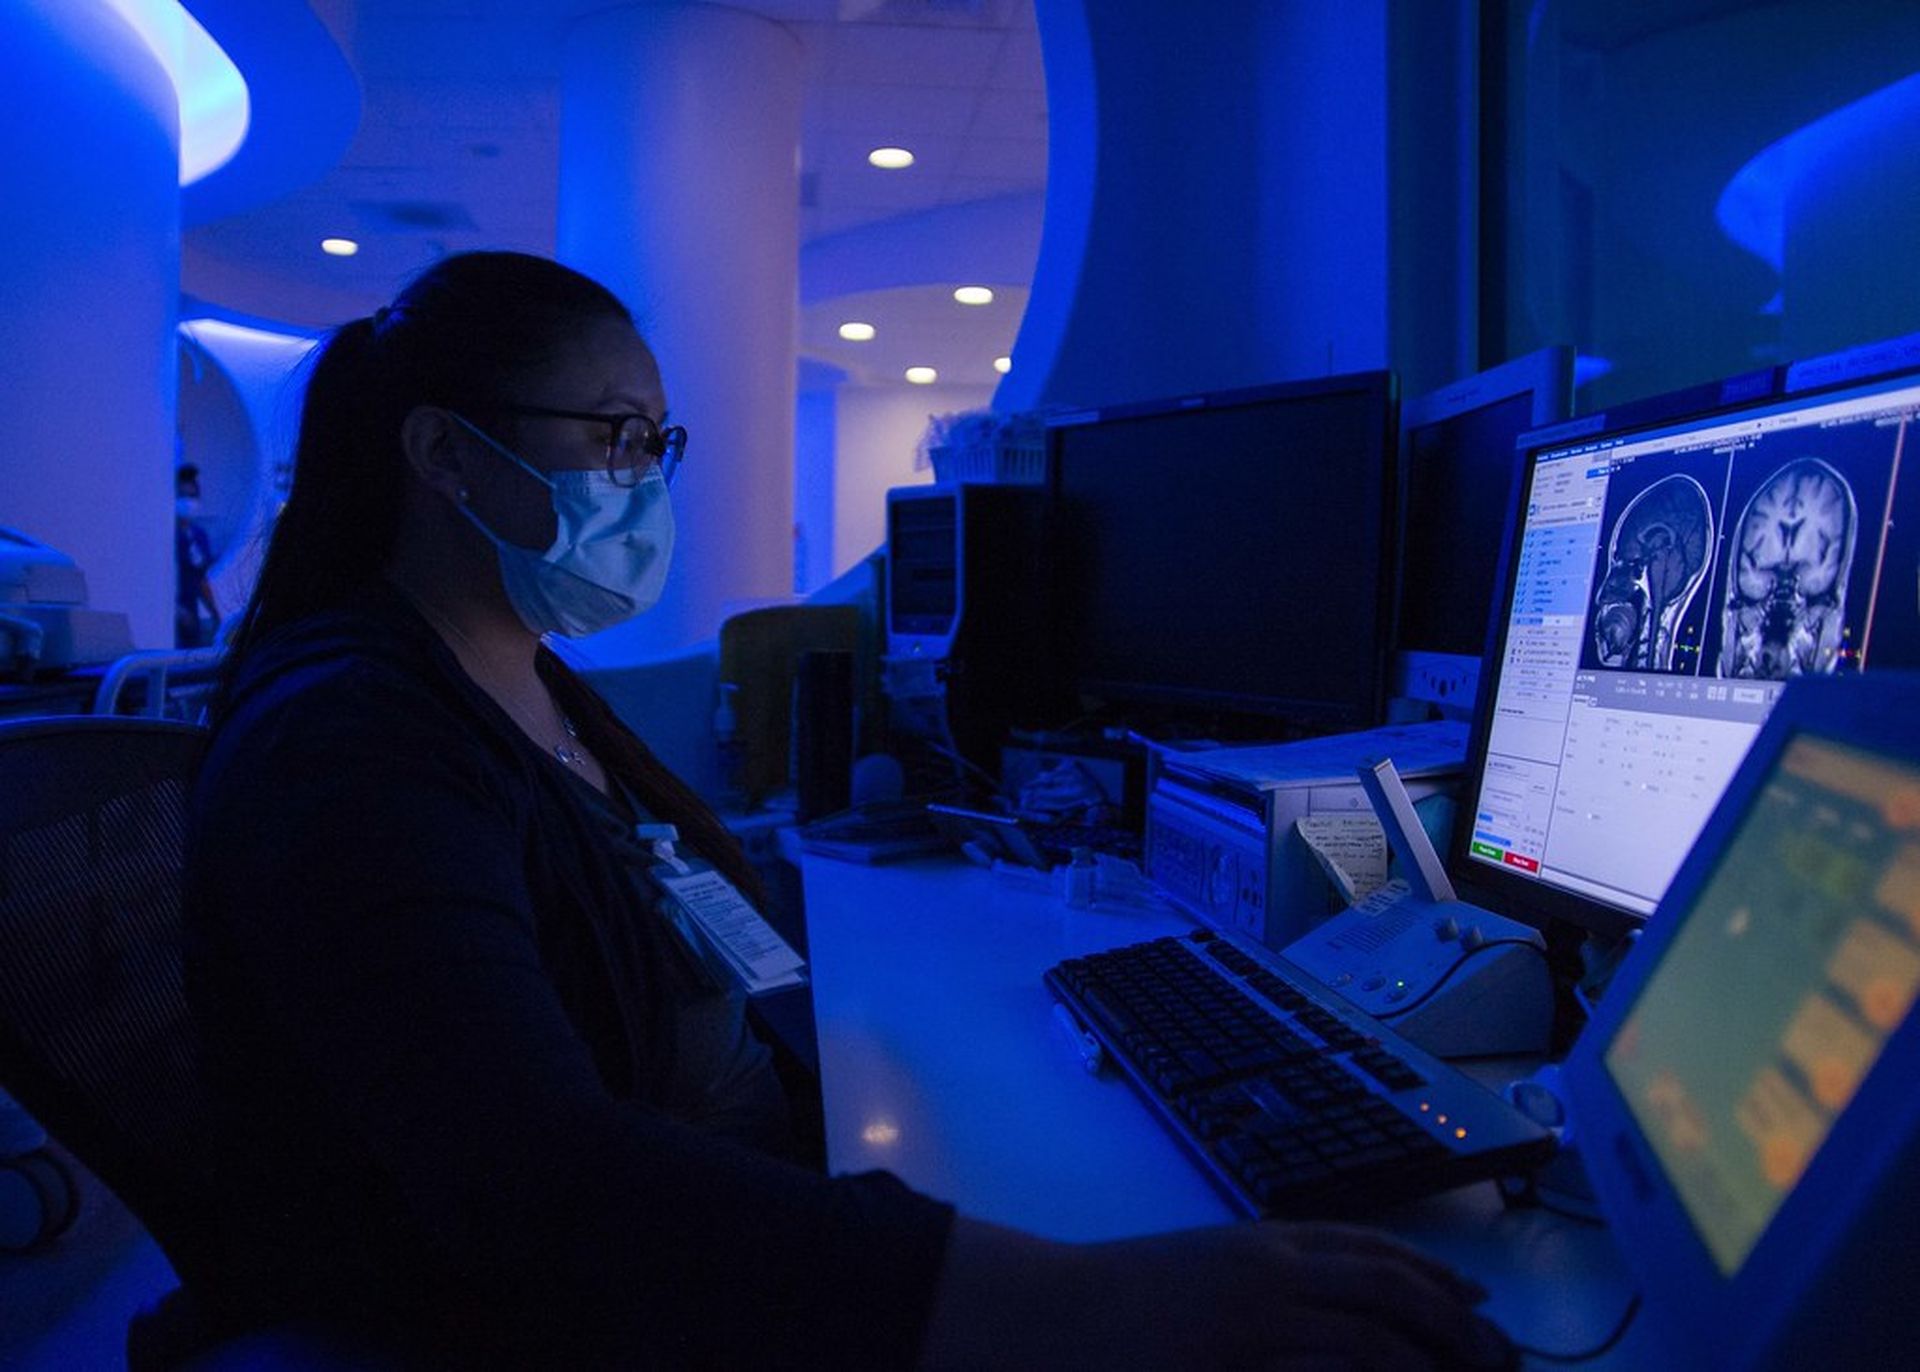 The healthcare has made some progress on medical device security, but much more needs to be done to better protect the high rate of legacy tech and vulnerable devices. (Photo credit: &#8220;A technologist at Naval Medical Center San Diego conducts an MRI scan.&#8221; by Official U.S. Navy Imagery is licensed under CC BY 2.0.)